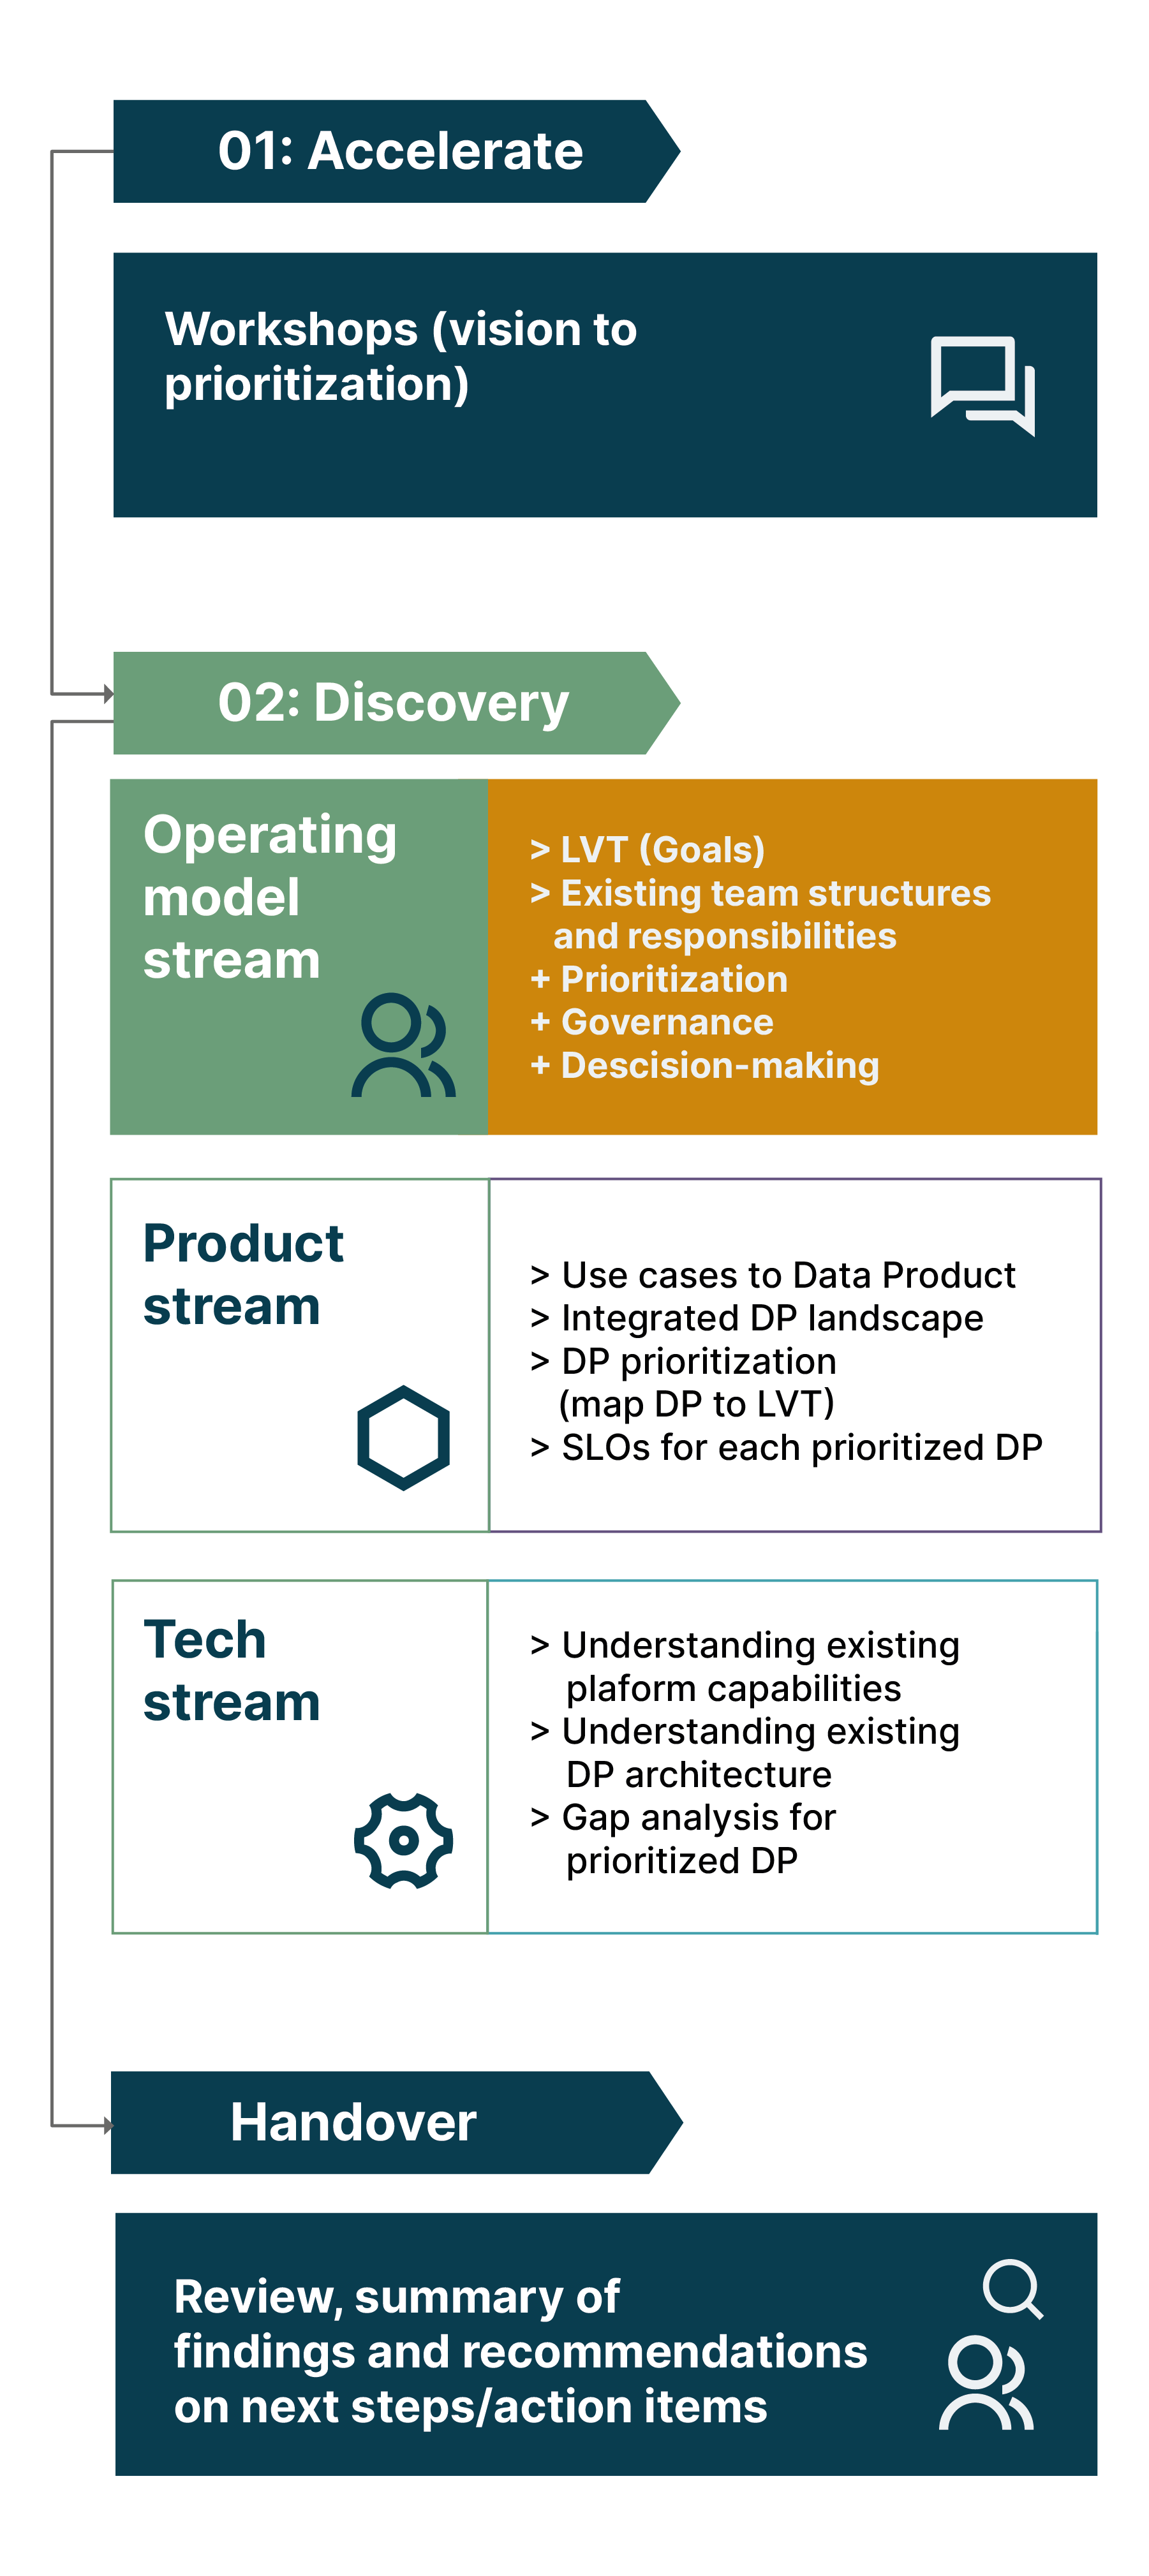 Three-stream discovery process across multiple domains at a major healthcare company. Here the focus is on the operating model stream.